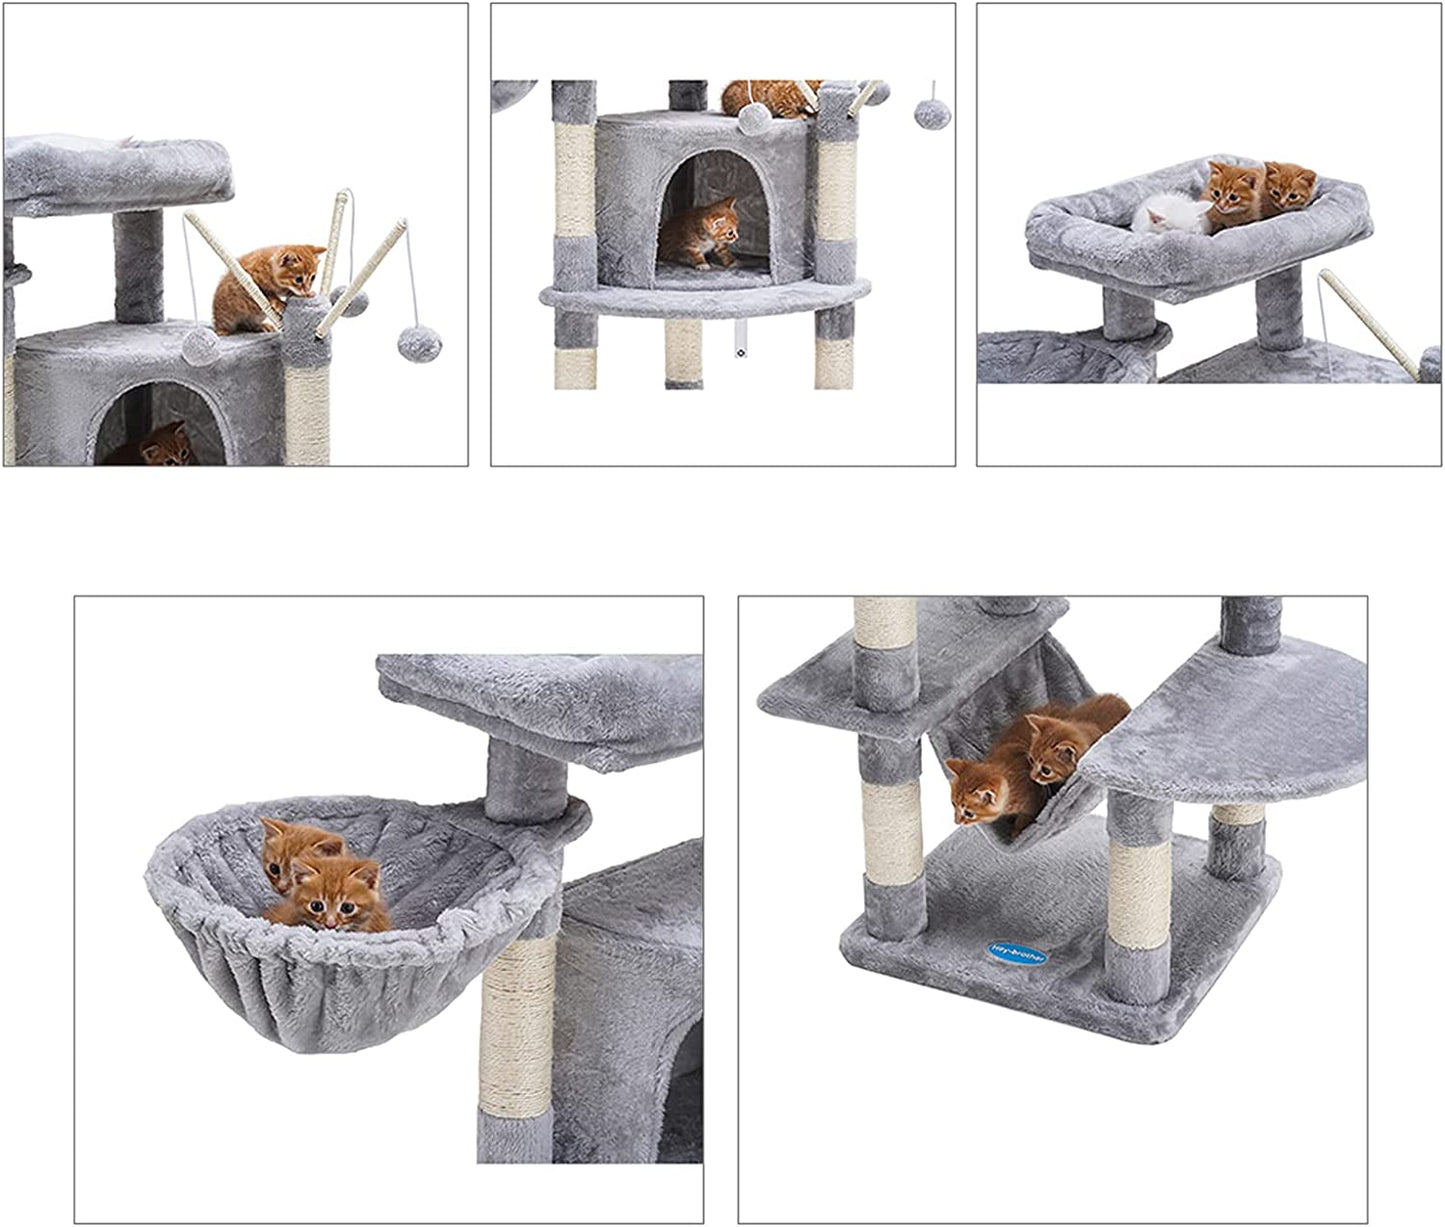 Cat Tree for Indoor Cats, 50 Inch Cat Tower with Scratch Posts, Sturdy Cat House with Large Cat Condo, Cat Perch, Cat Hammock and Interactive Cat Toy Light Gray MPJ016W